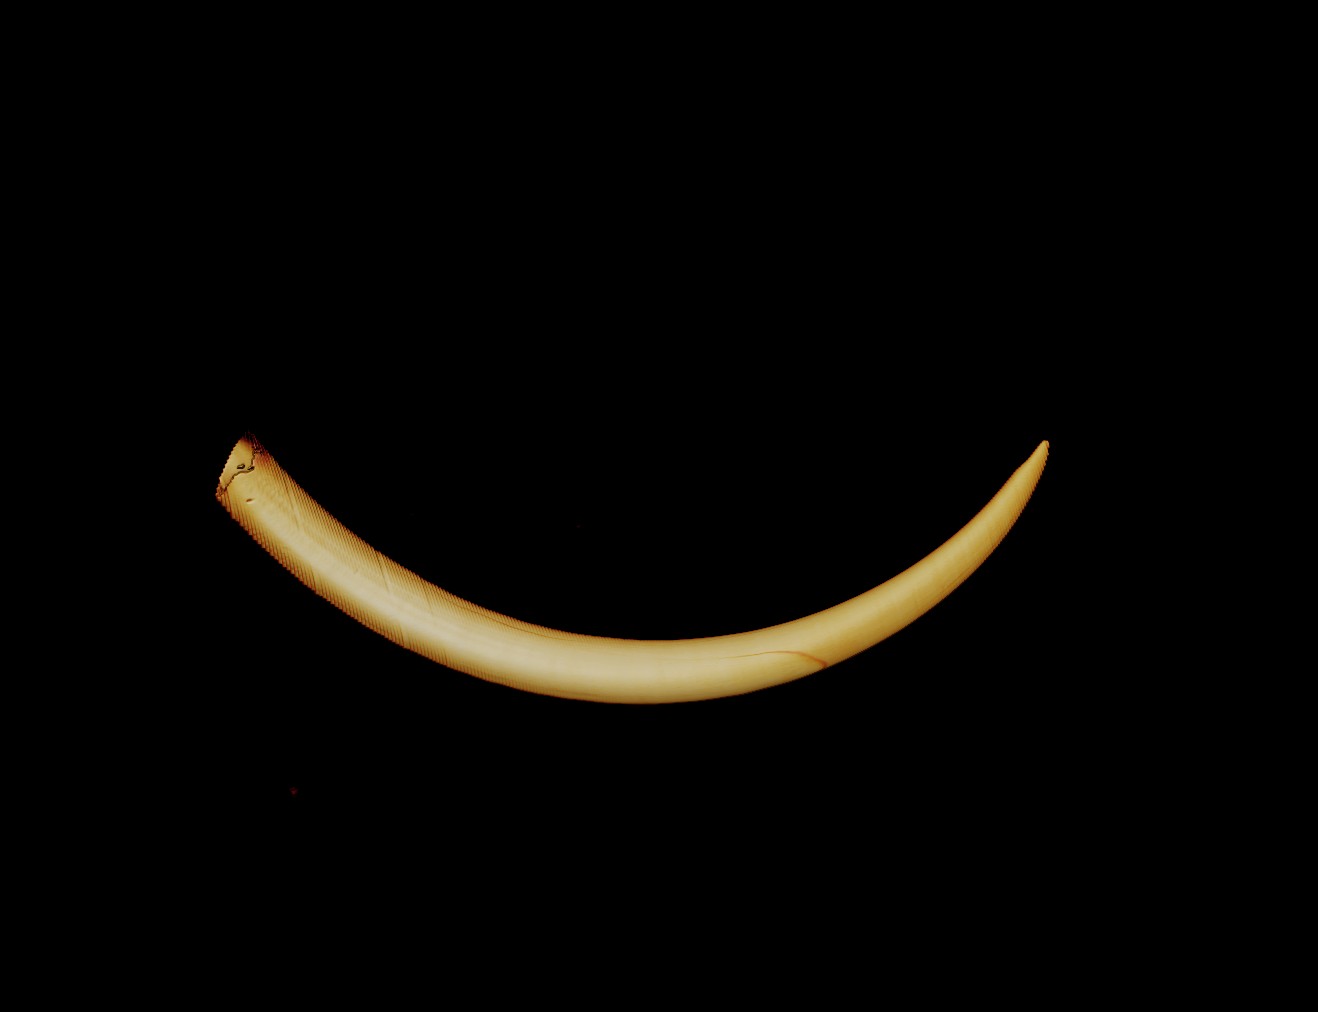 Computerized tomography (CT) scan of the right tusk of an African elephant